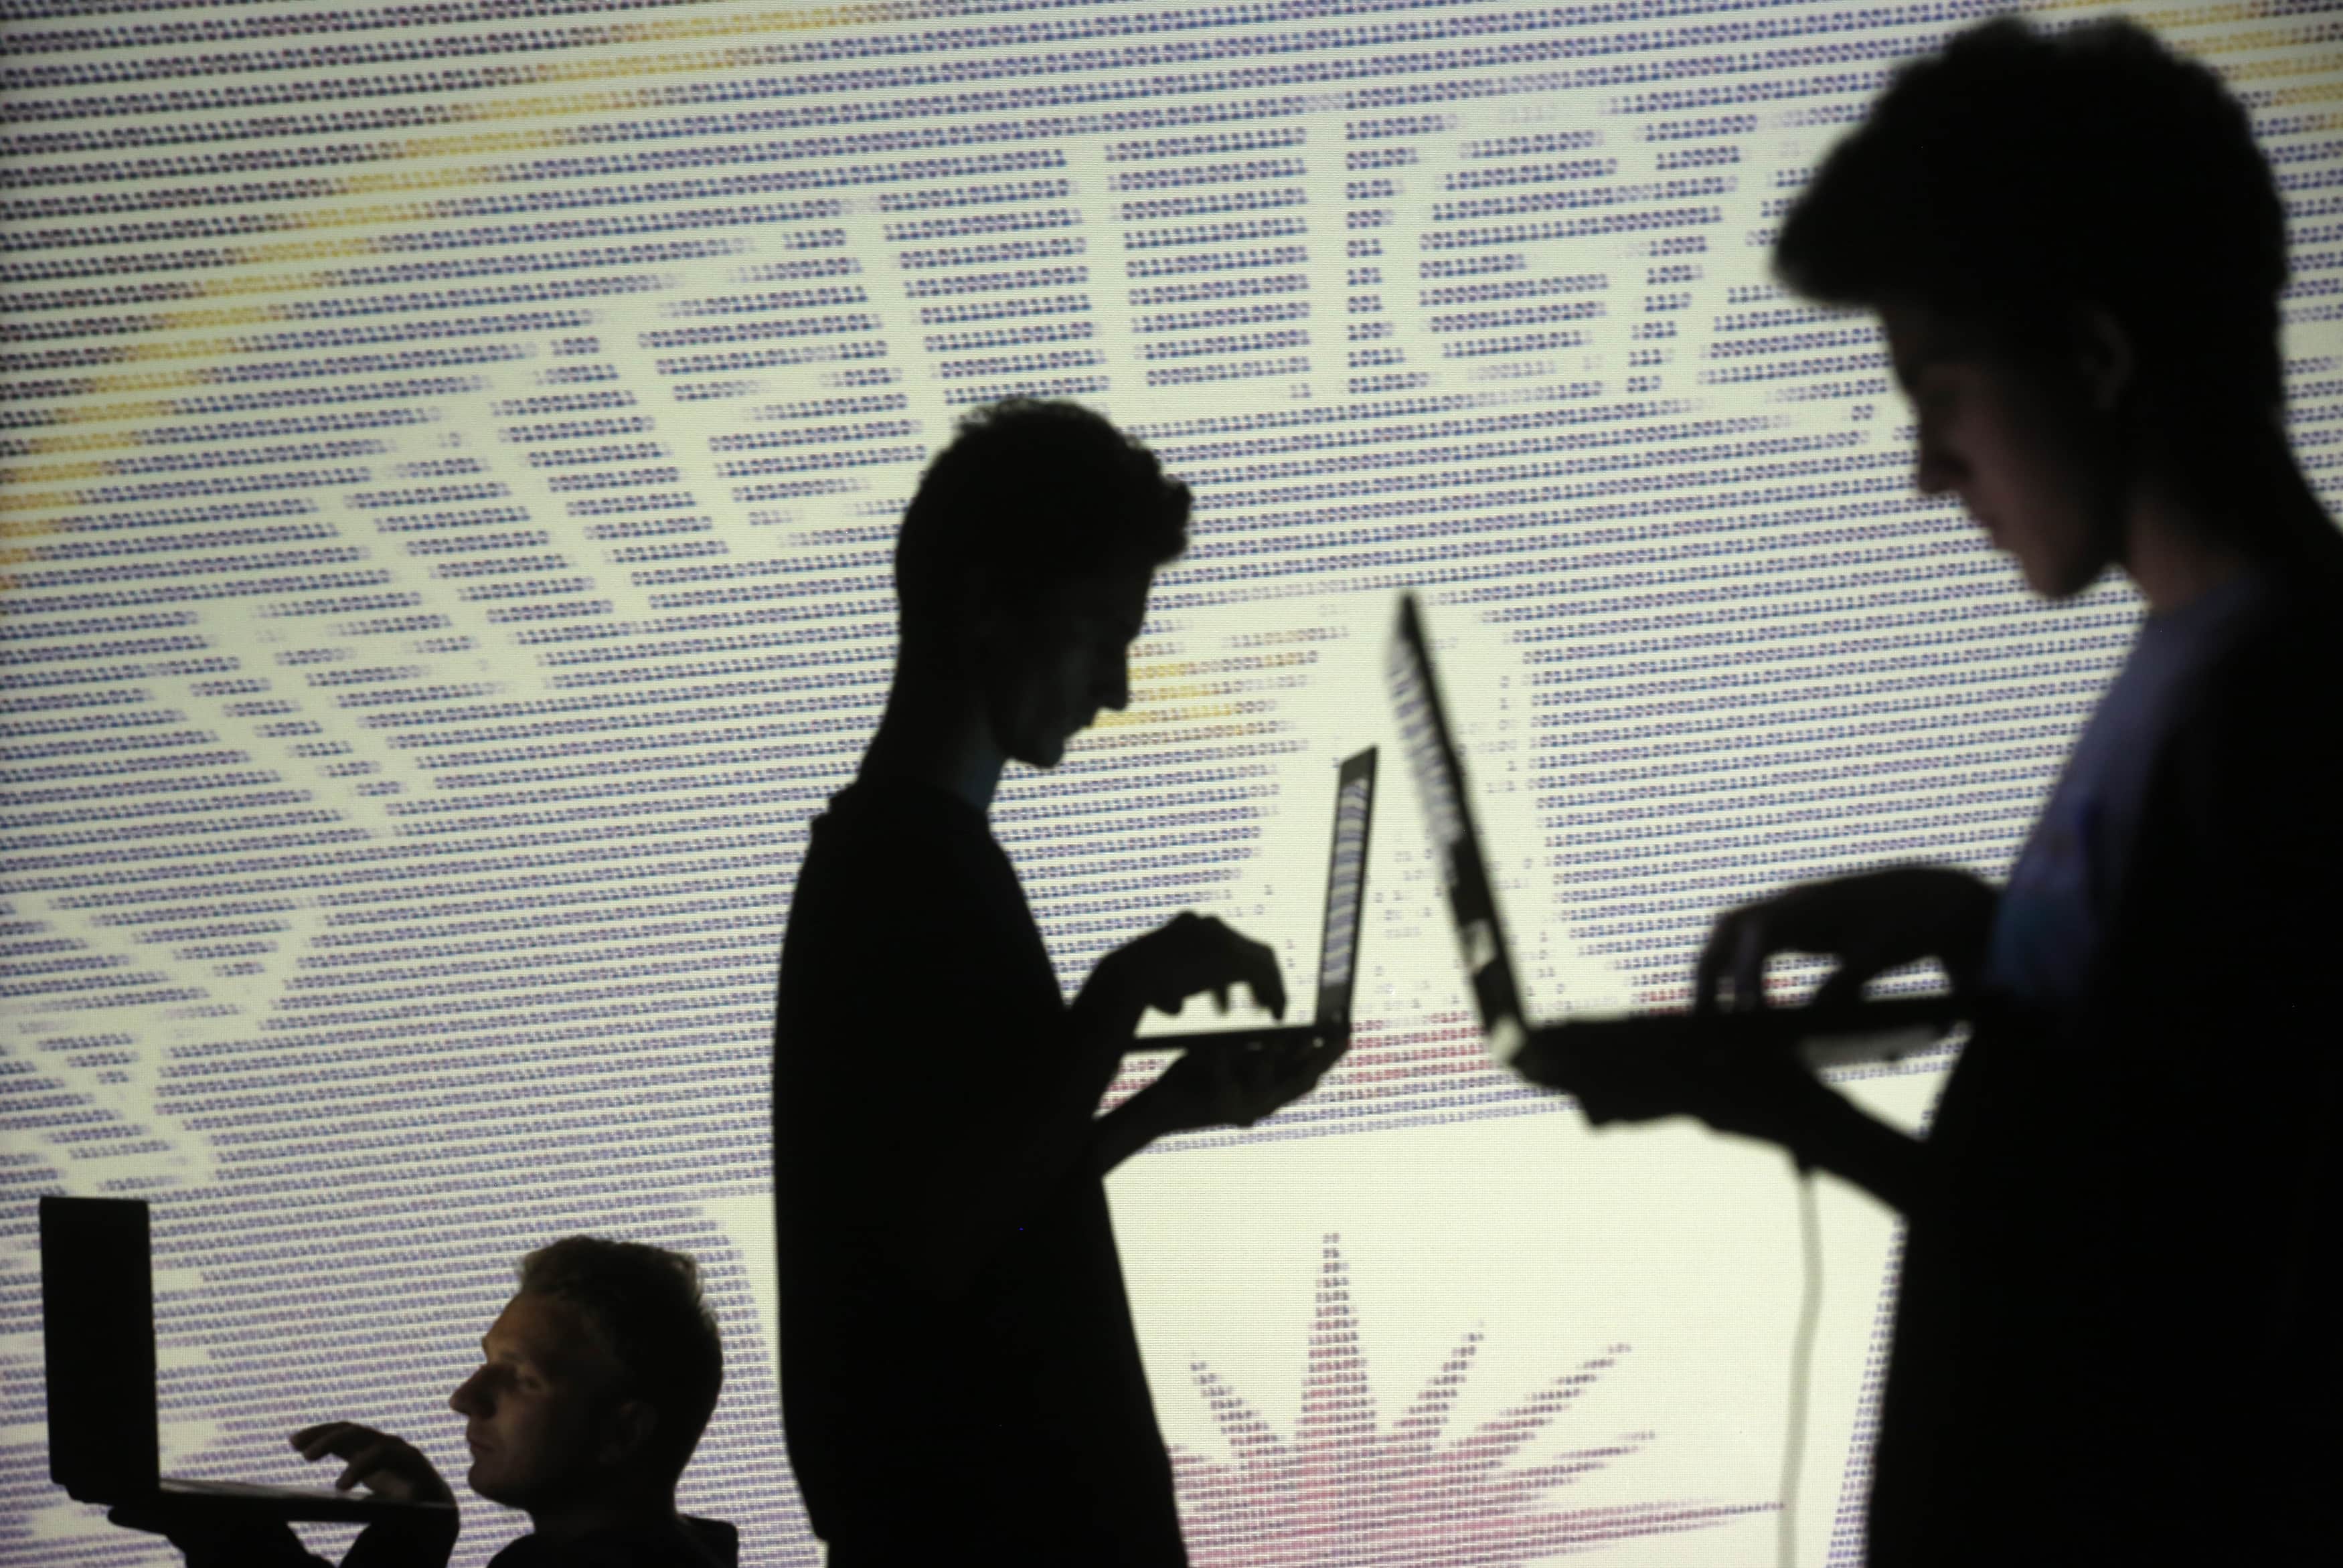 People are silhouetted as they pose with laptops in front of a screen projected with binary code and a CIA emblem, in Zenica, Bosnia, 29 October 2014, REUTERS/Dado Ruvic